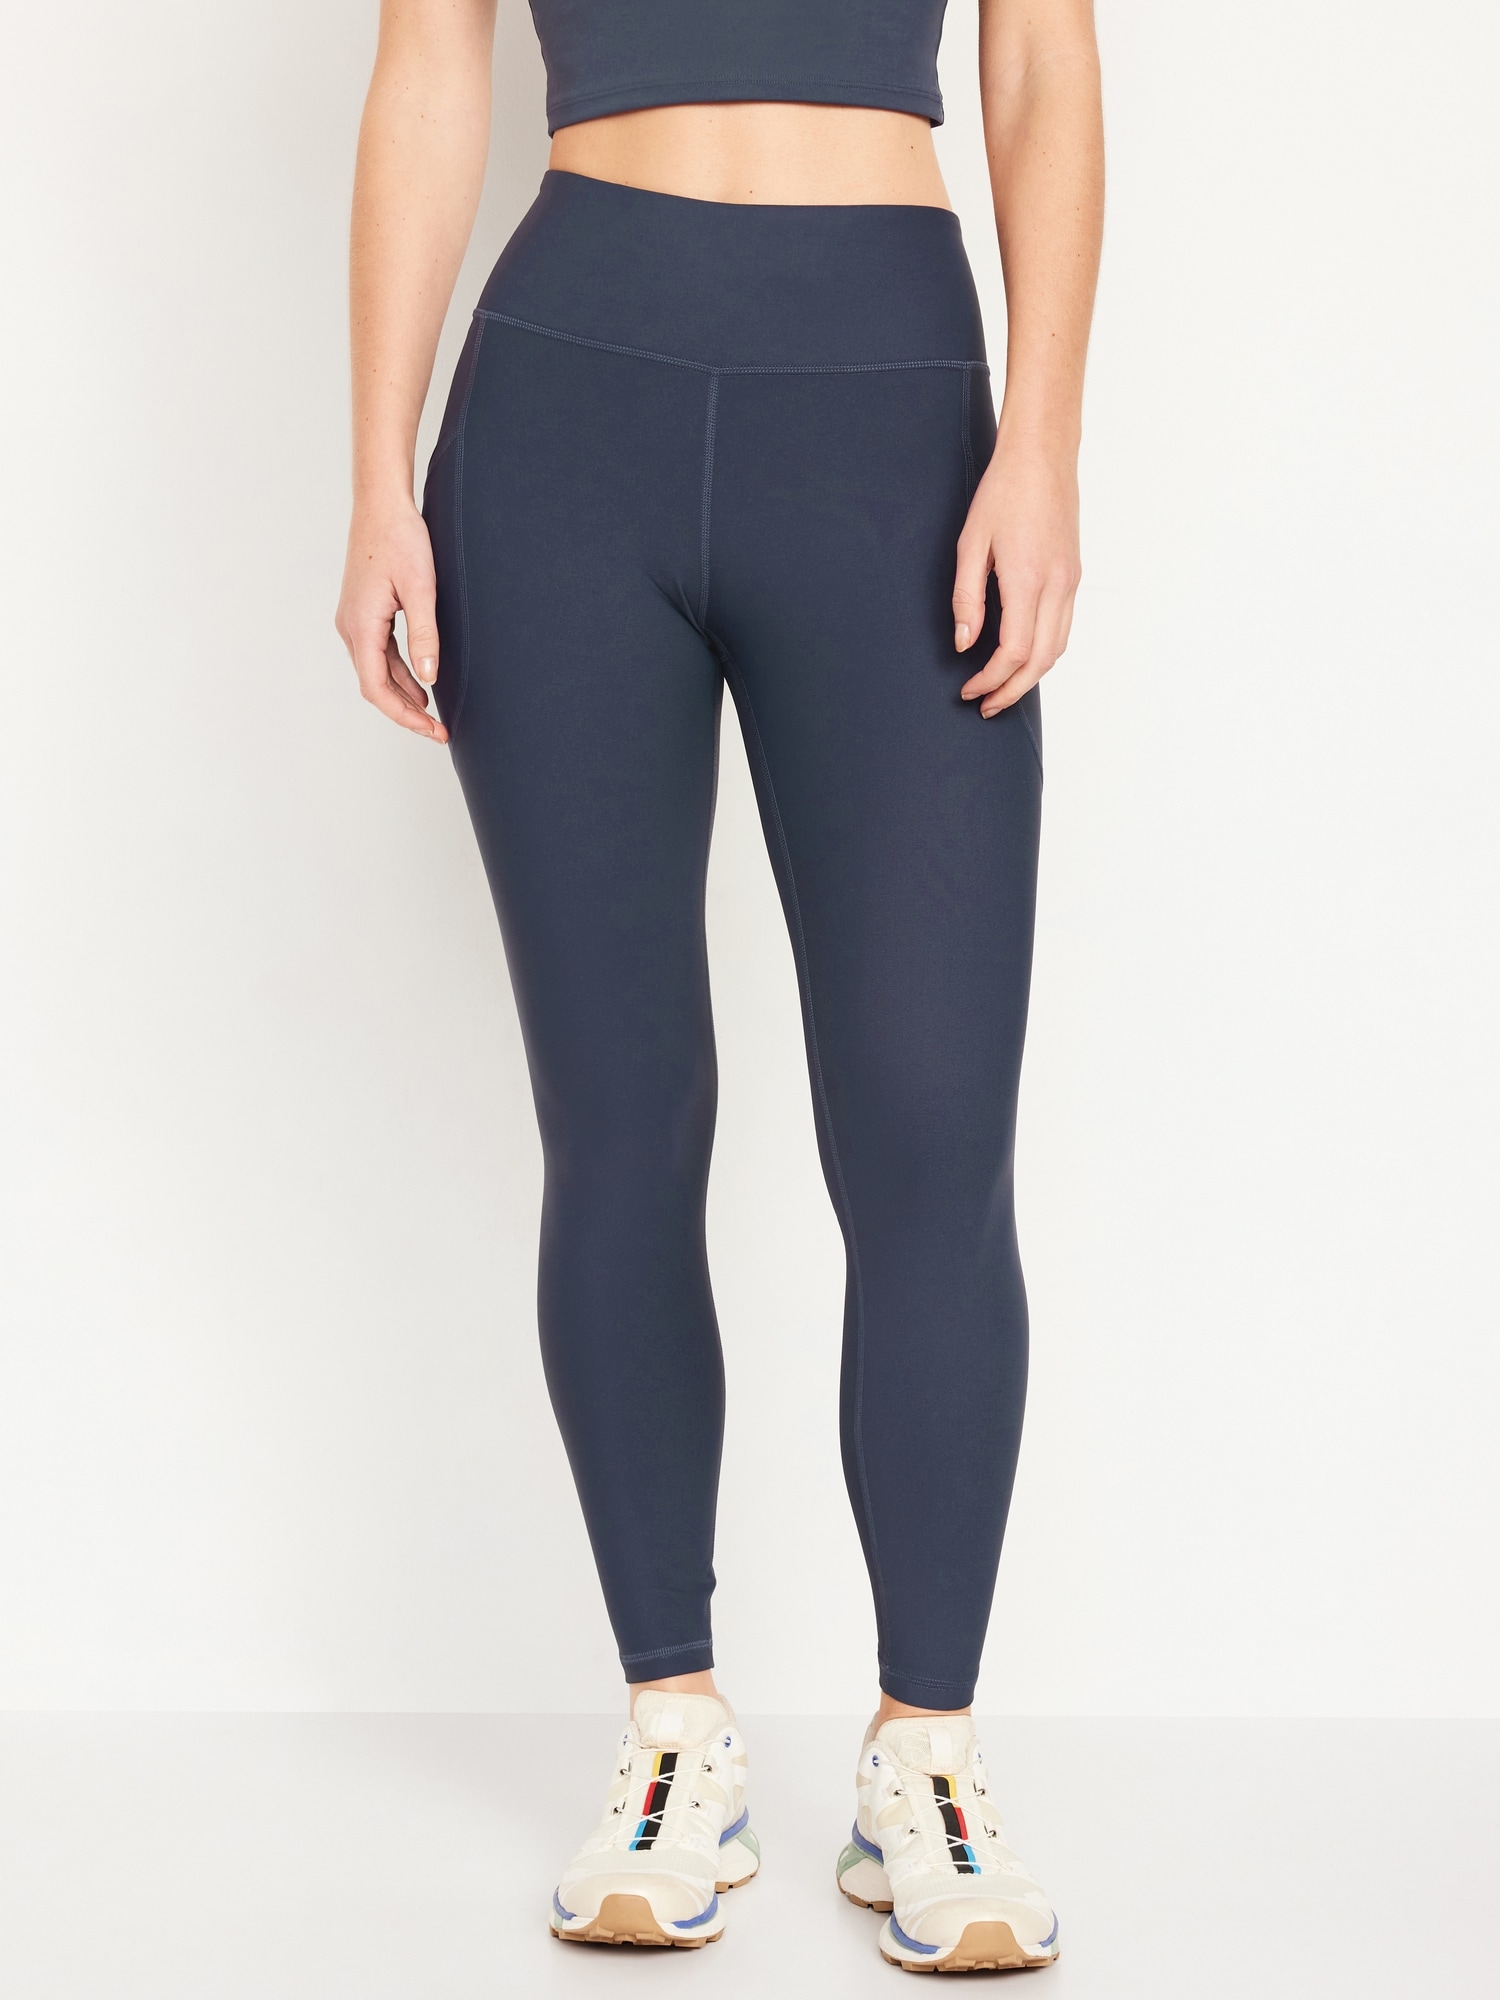 Old Navy Powersoft joggers Size XXL - $24 (40% Off Retail) - From